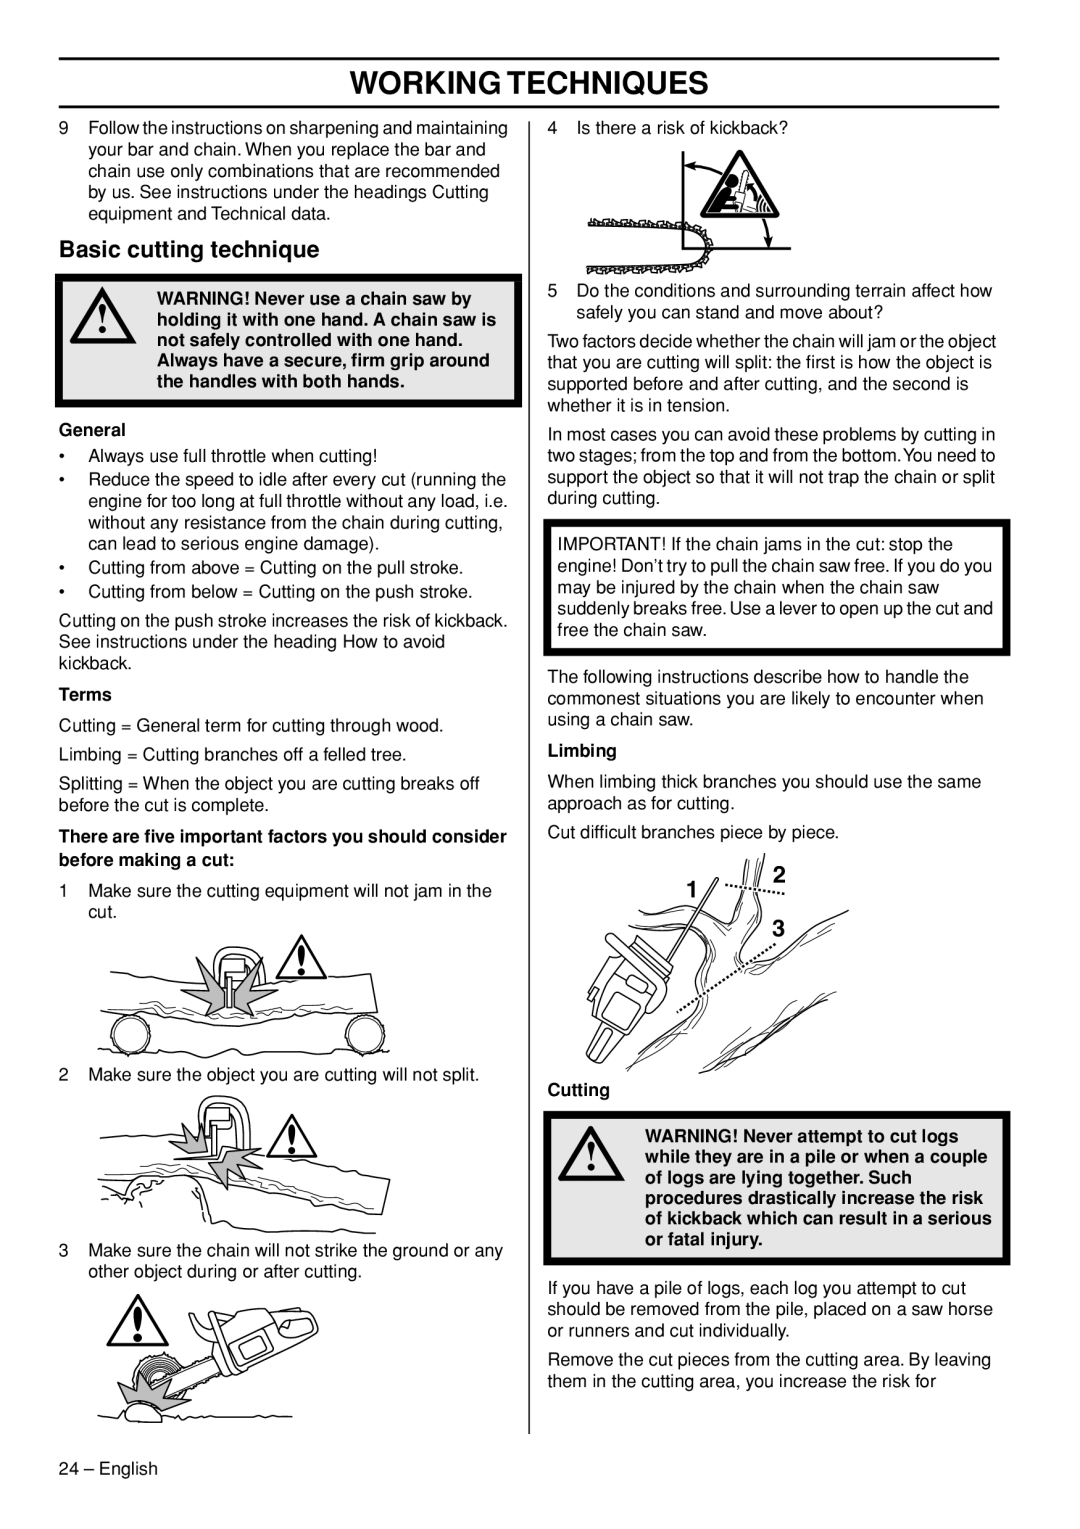 Husqvarna 3120XP Basic cutting technique, WARNING! Never use a chain saw by, General, Terms, Limbing, before making a cut 